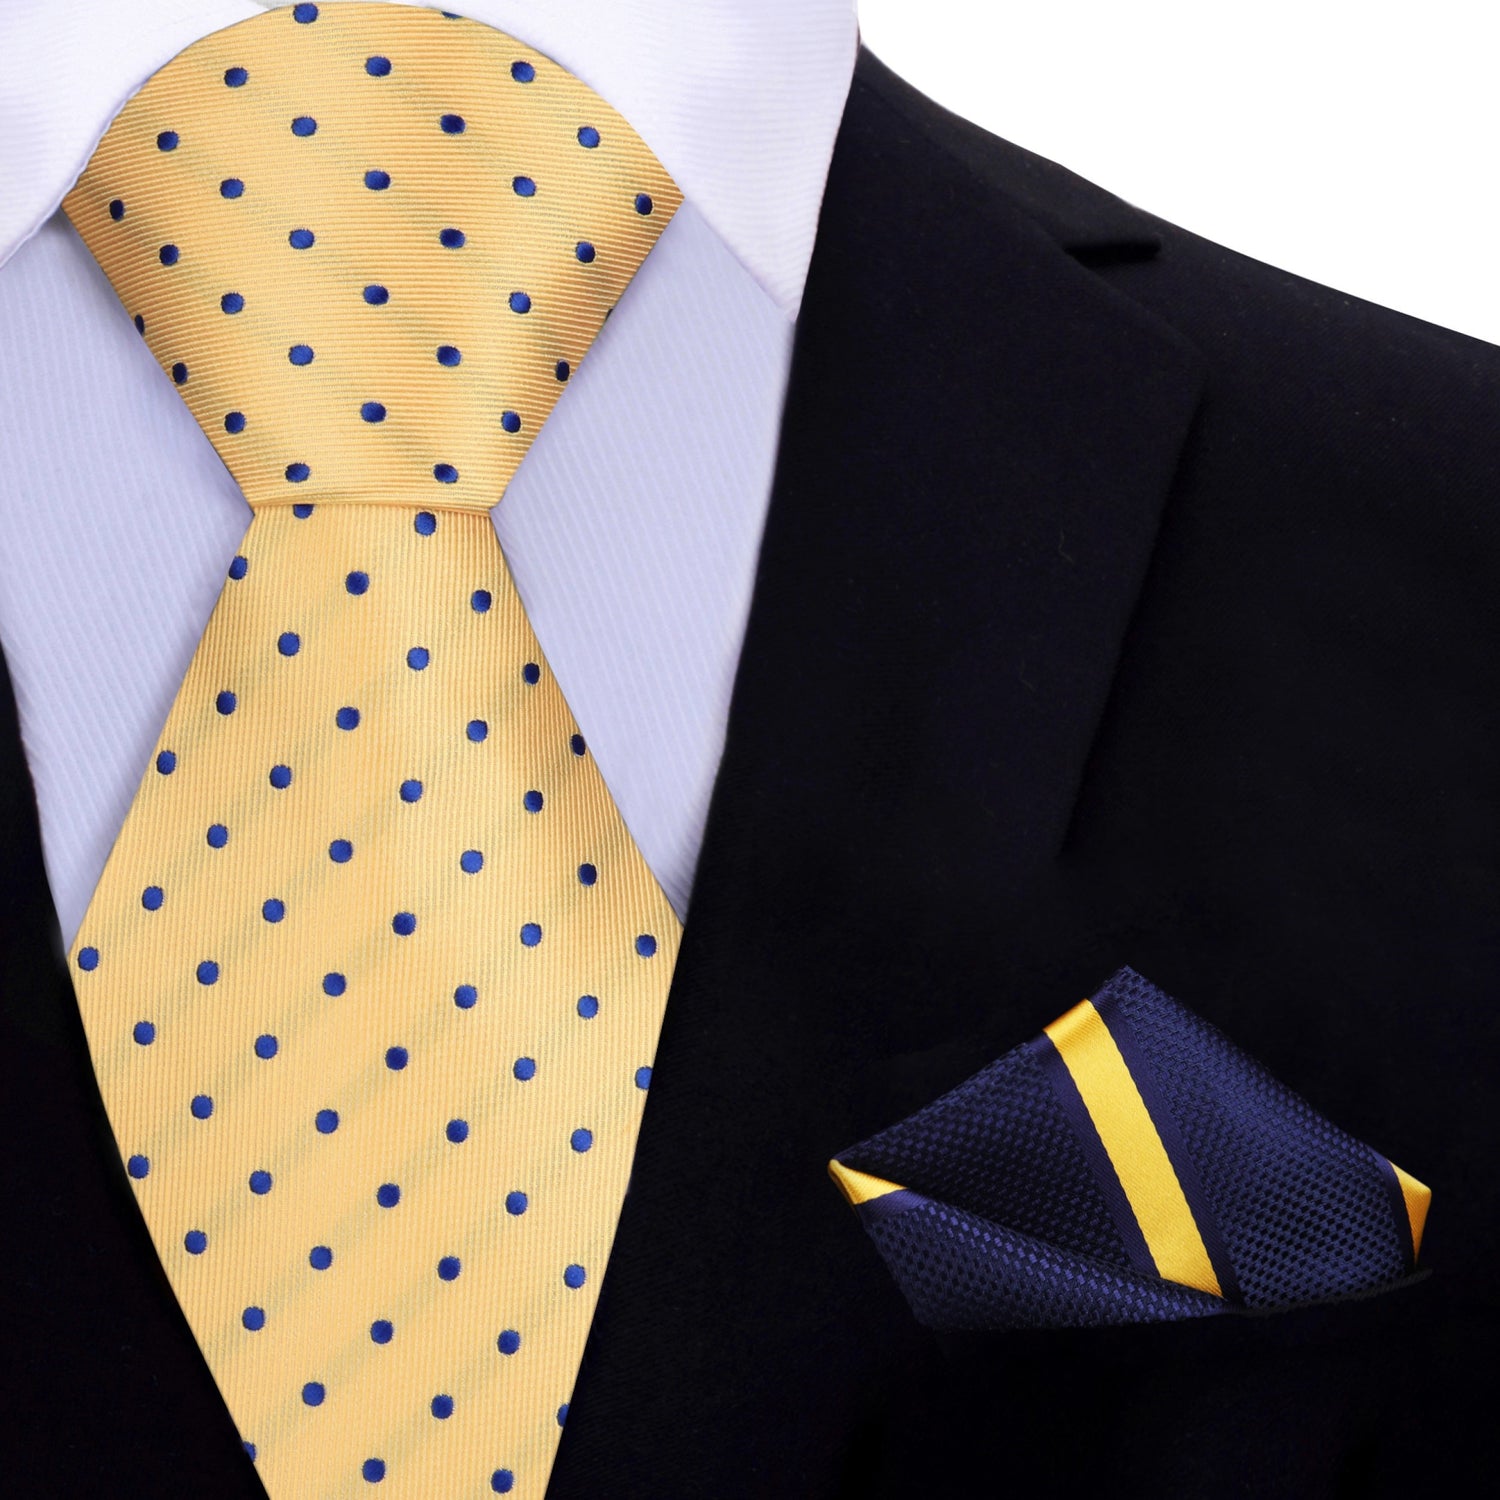 Alt View: Yellow with Blue Dots Necktie and Blue, Yellow Stripe Square